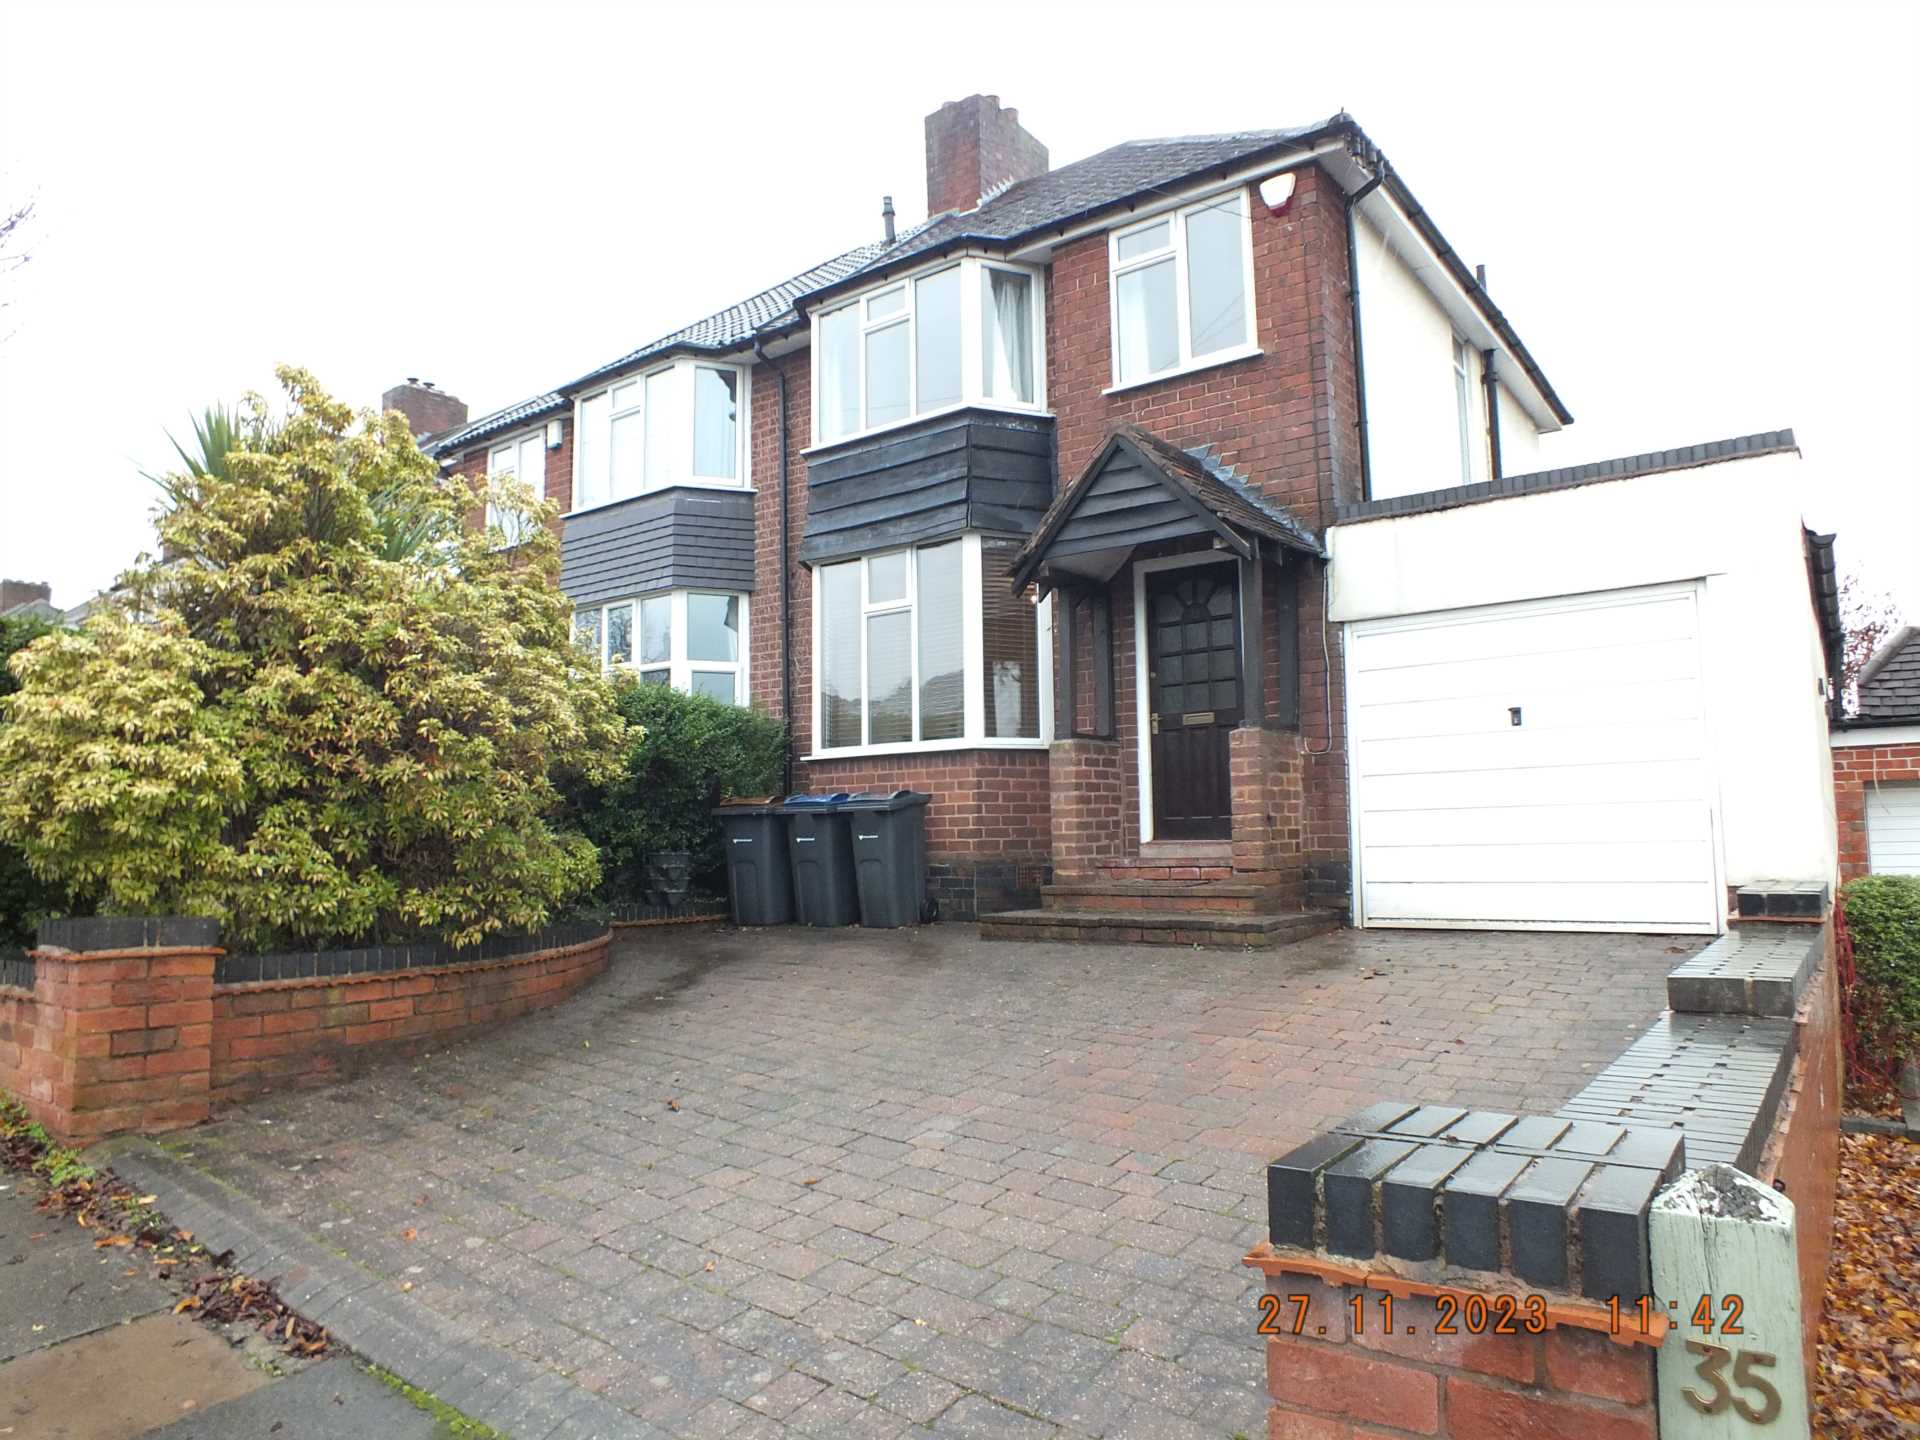 3 bed Semi-Detached House for rent in Sutton Coldfield. From Bergason Estate Agents